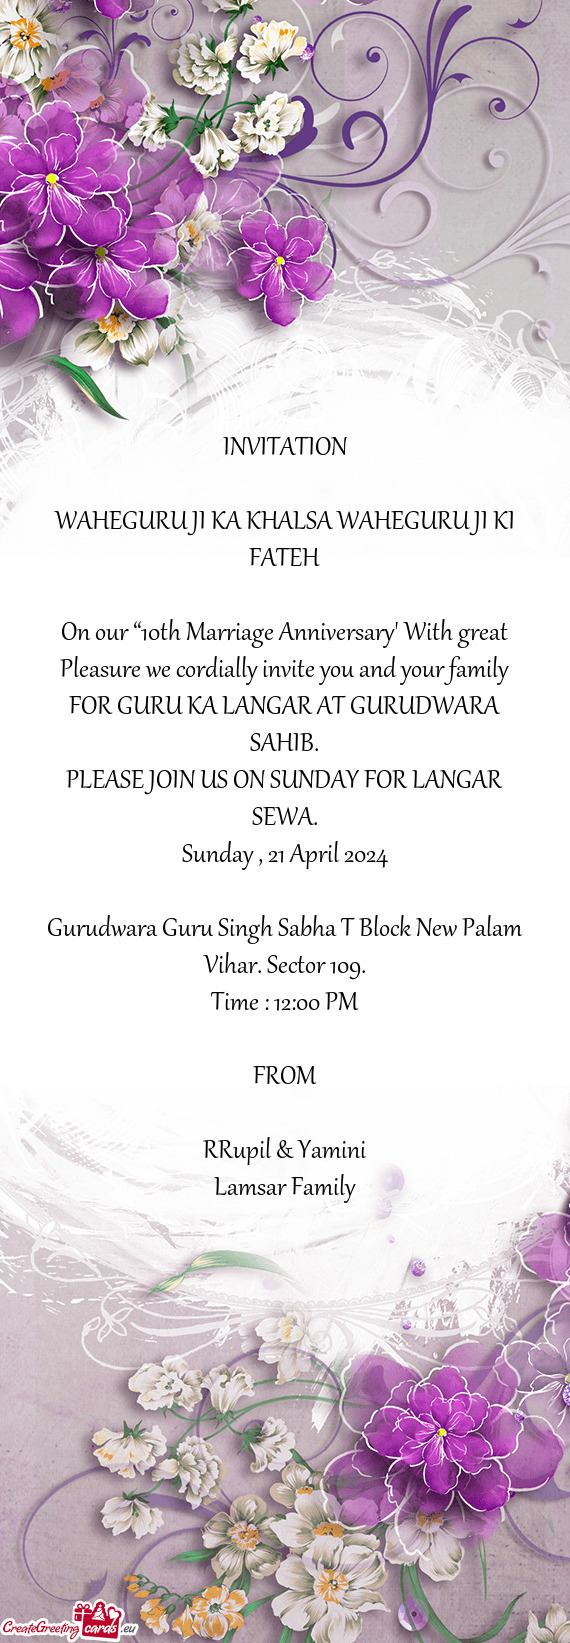 On our “10th Marriage Anniversary” With great Pleasure we cordially invite you and your family